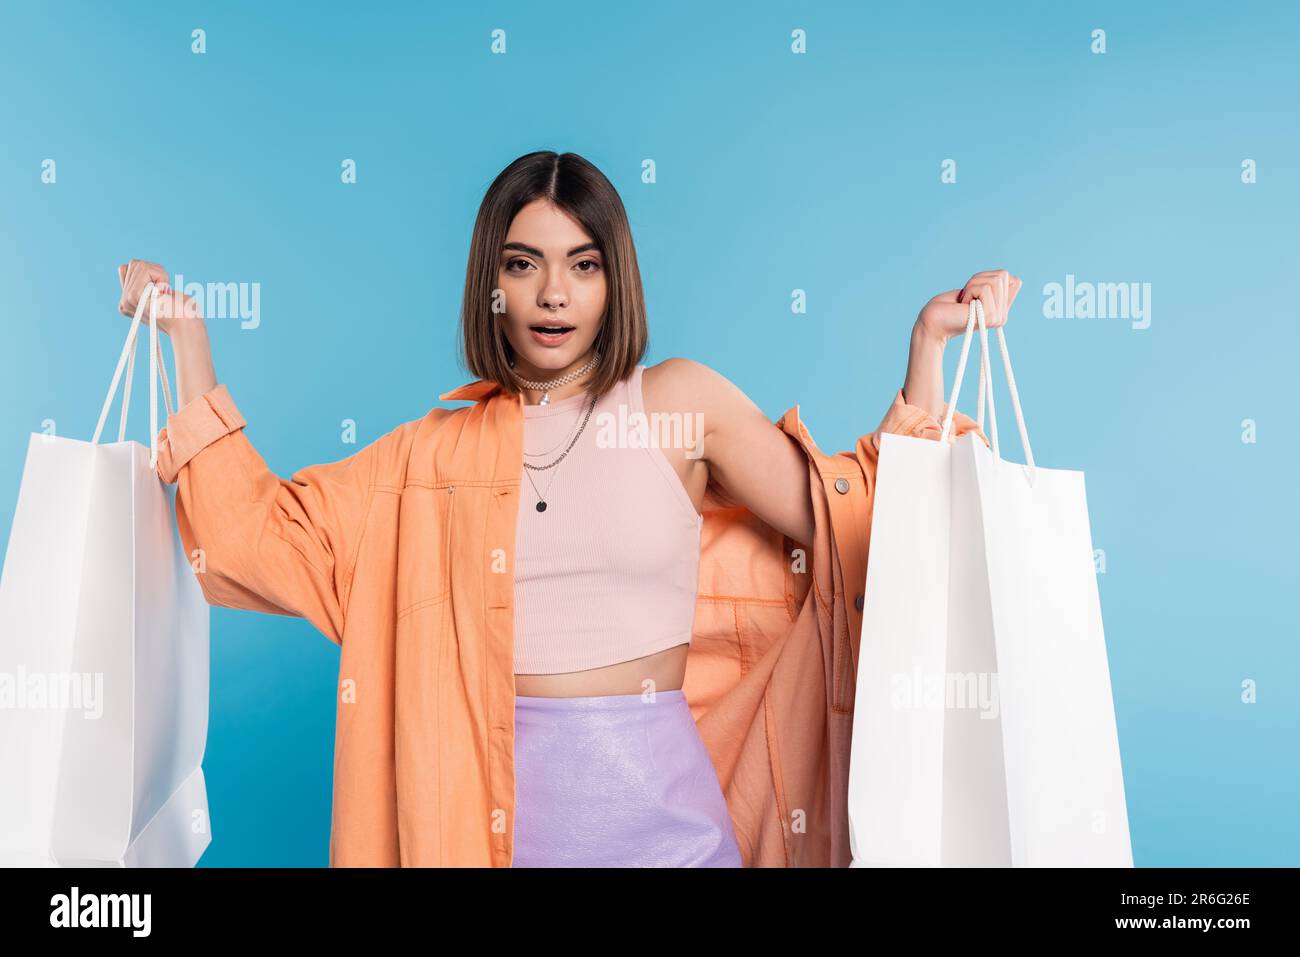 summer trends, pierced young woman in fashionable outfit posing with shopping bags on blue background, casual attire, stylish, generation z, modern fa Stock Photo